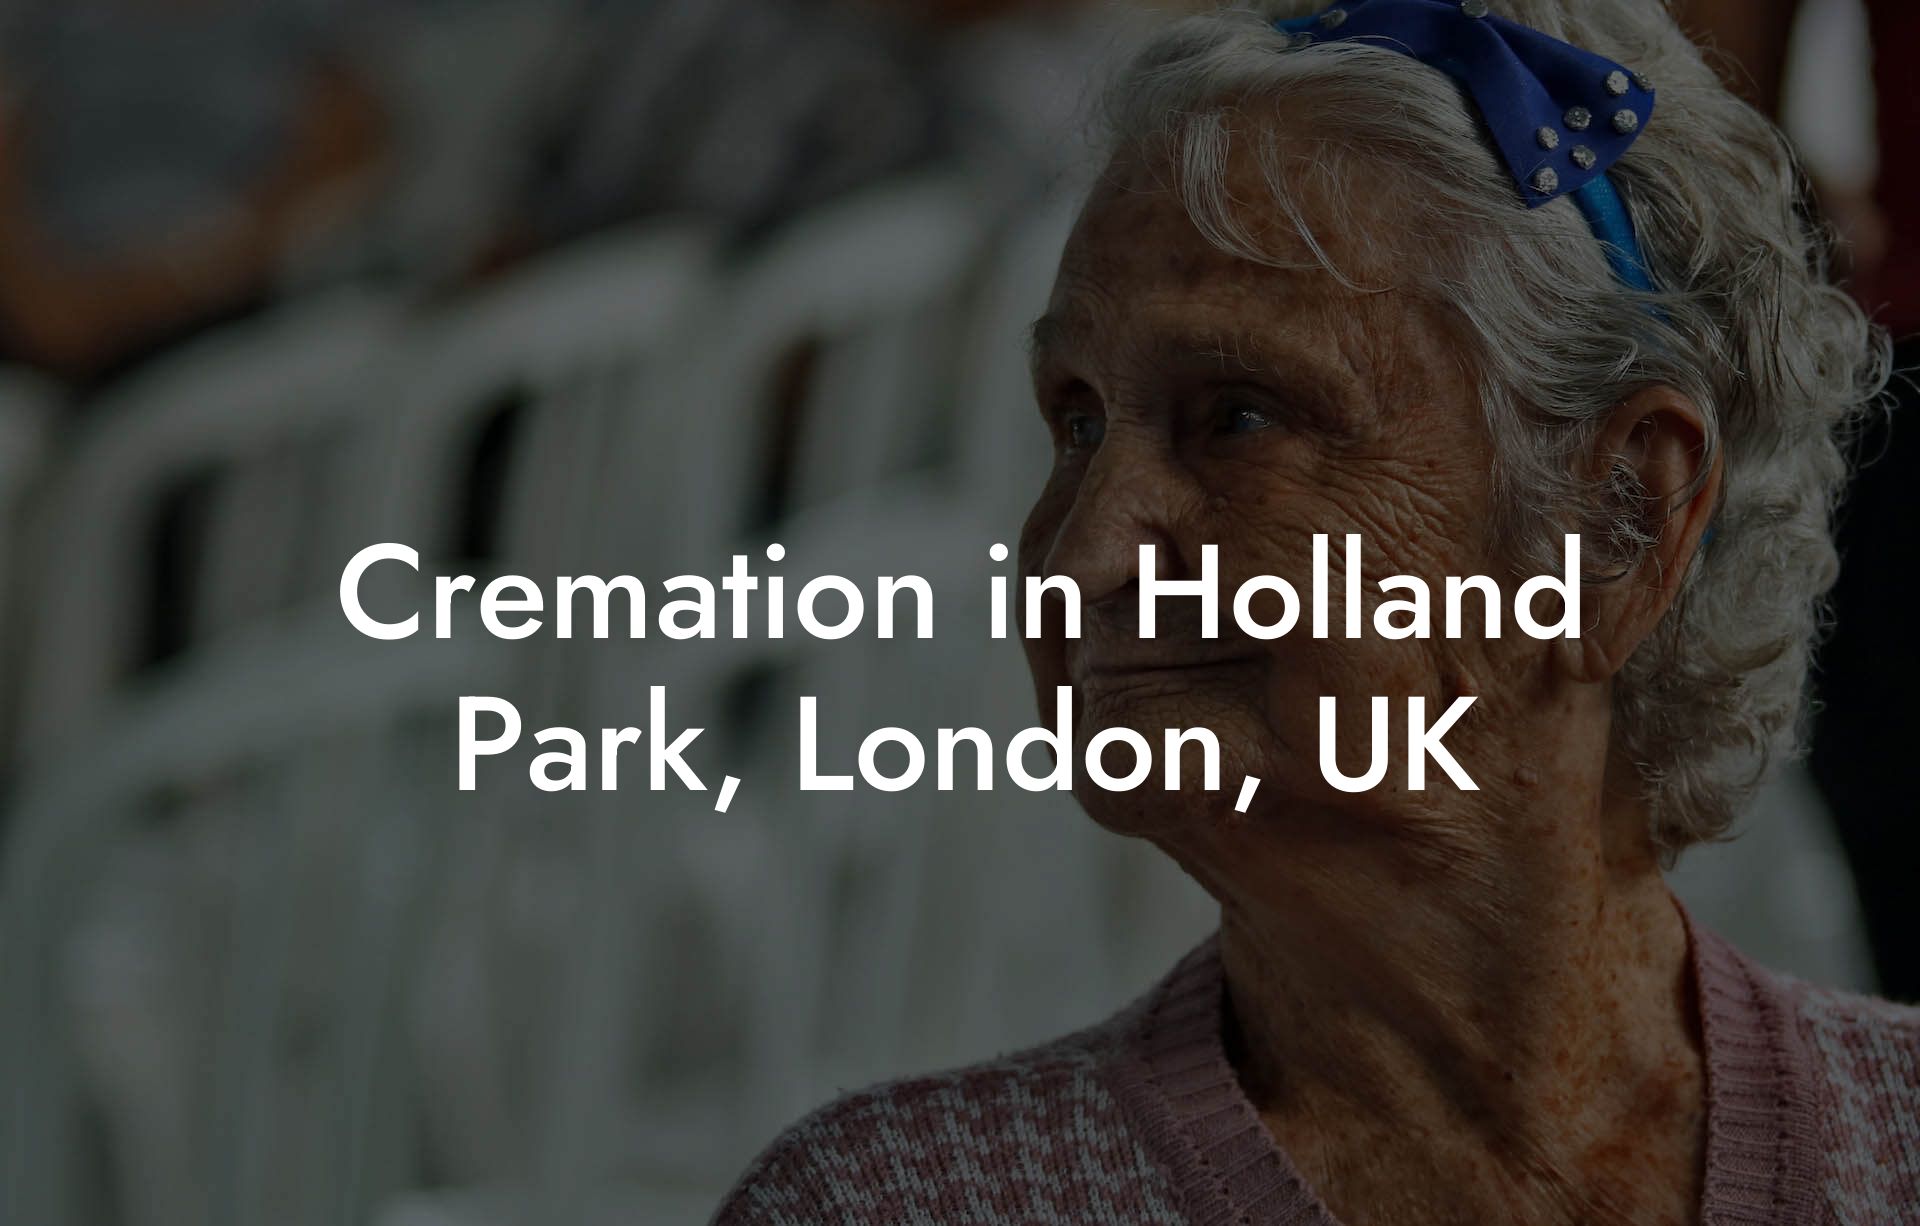 Cremation in Holland Park, London, UK